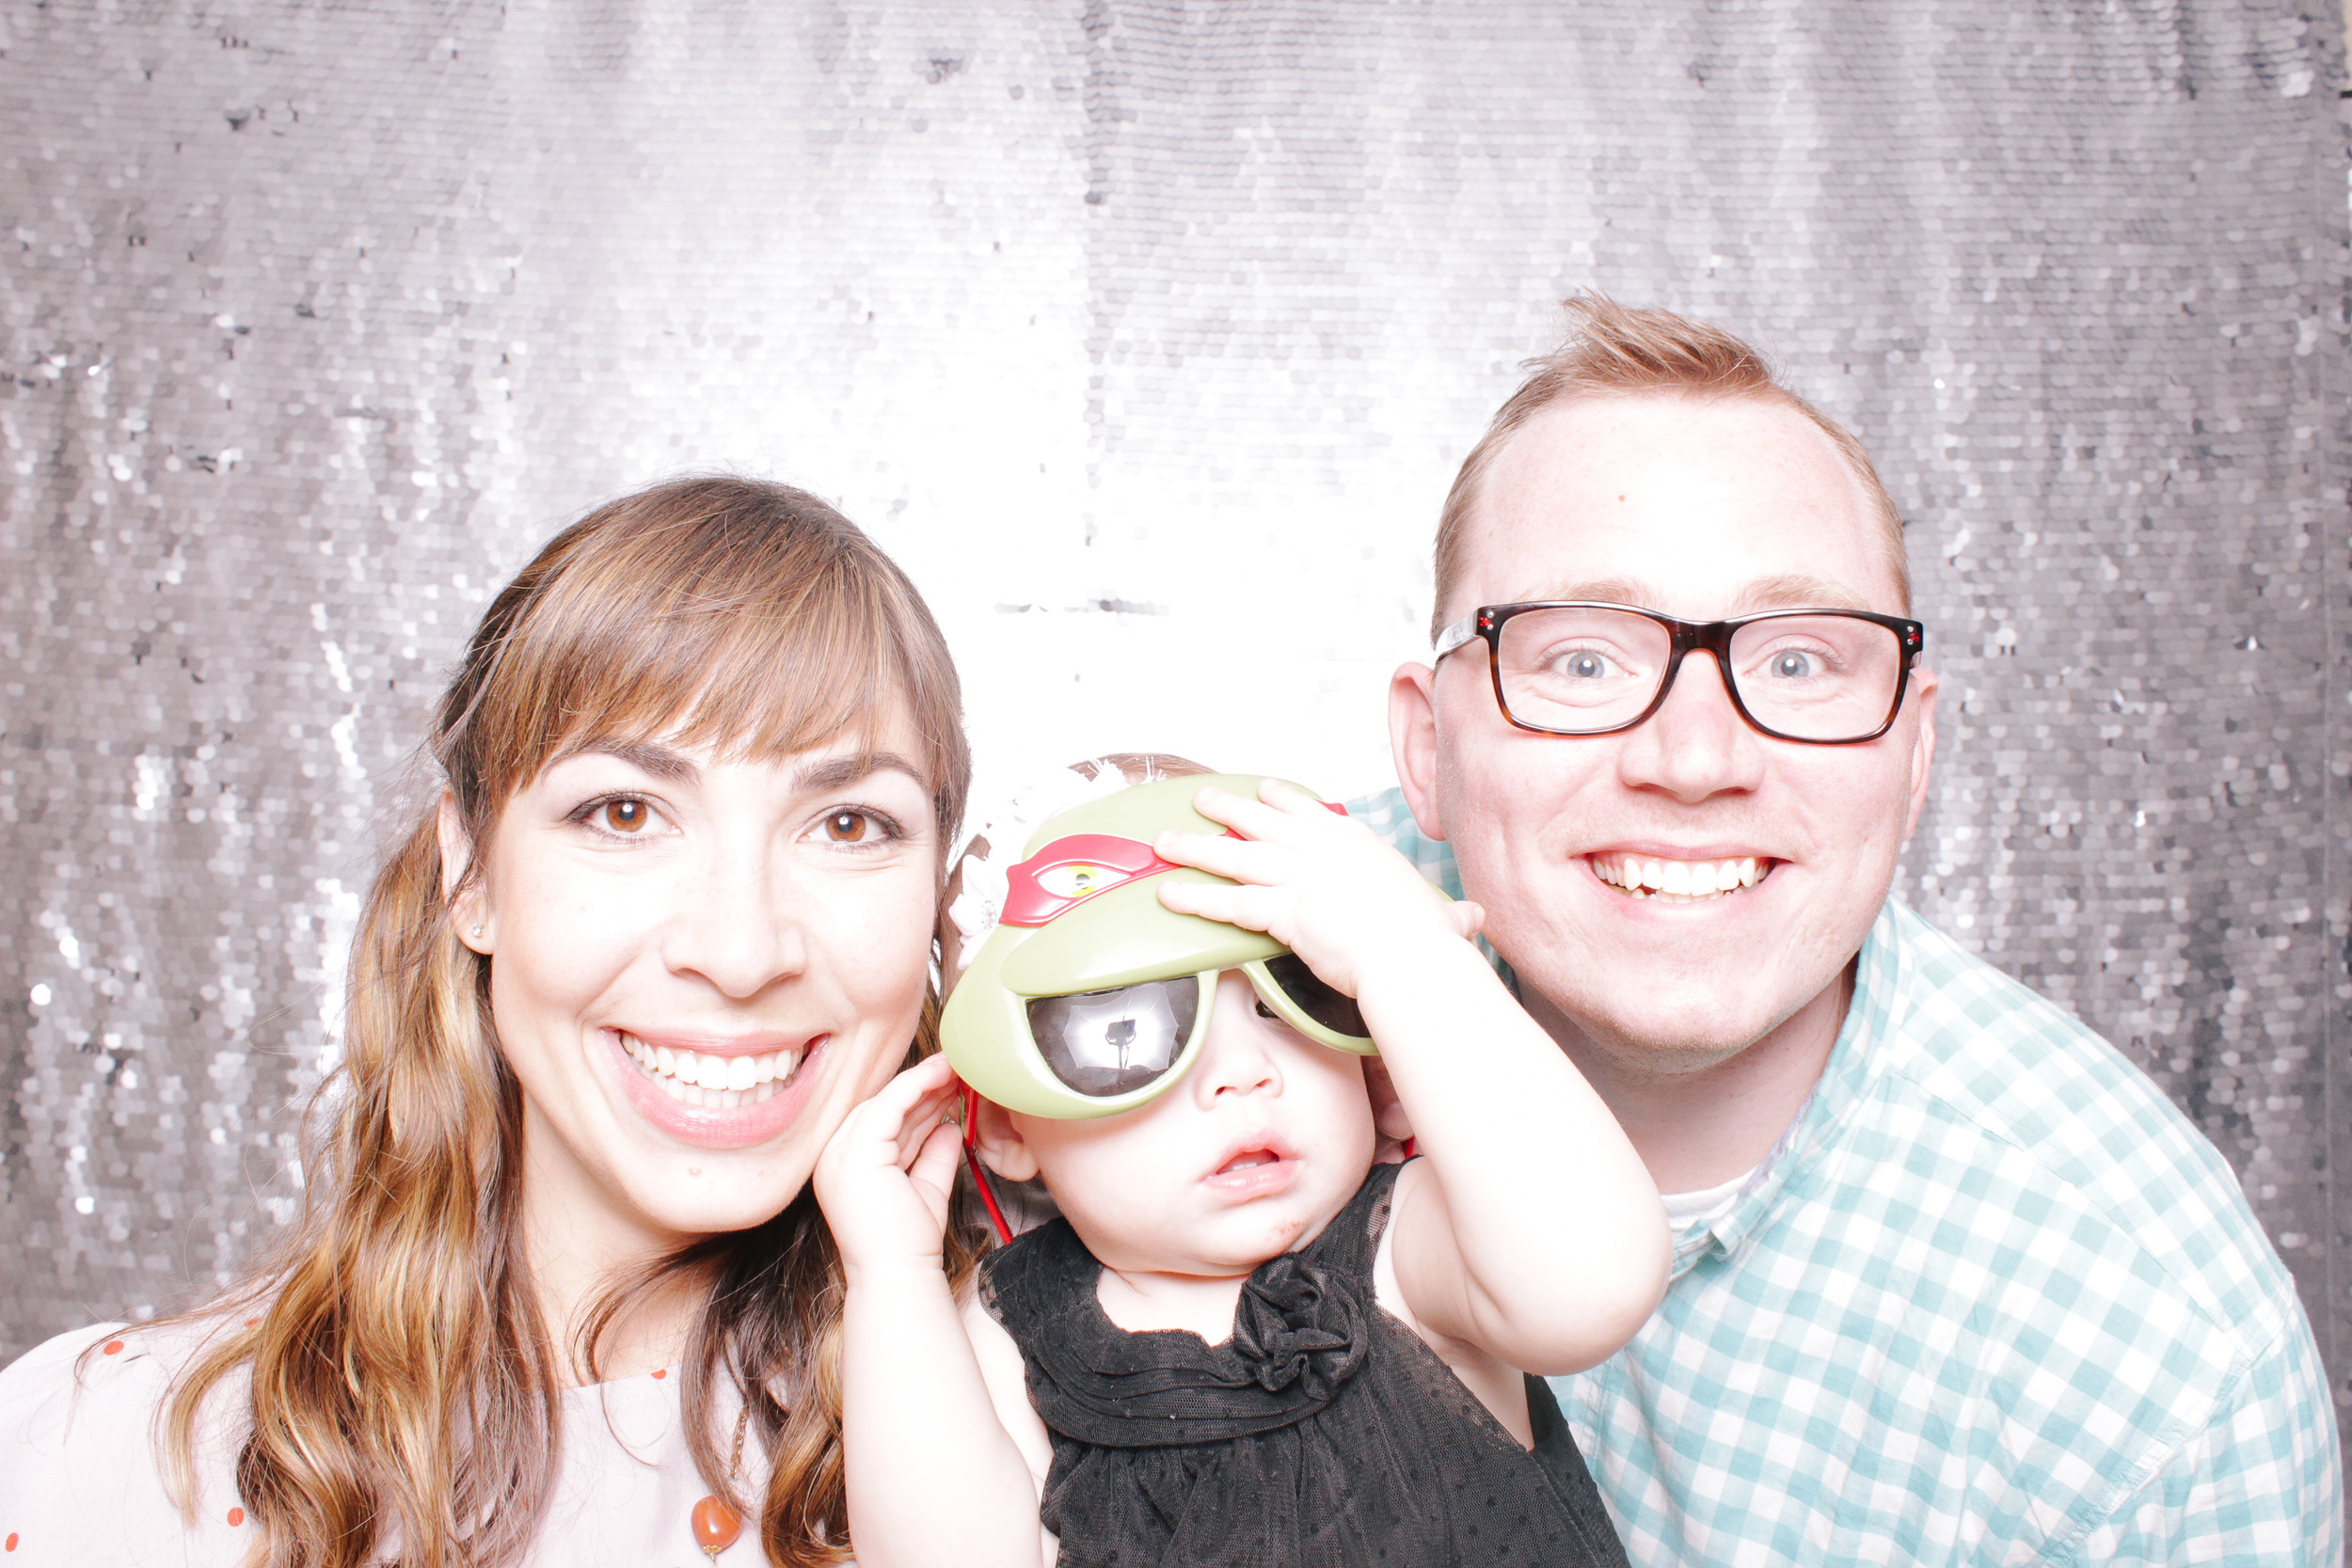 00194-Megs Sweet 16 Birthday Photo Booth in Cleveland-20150418.jpg